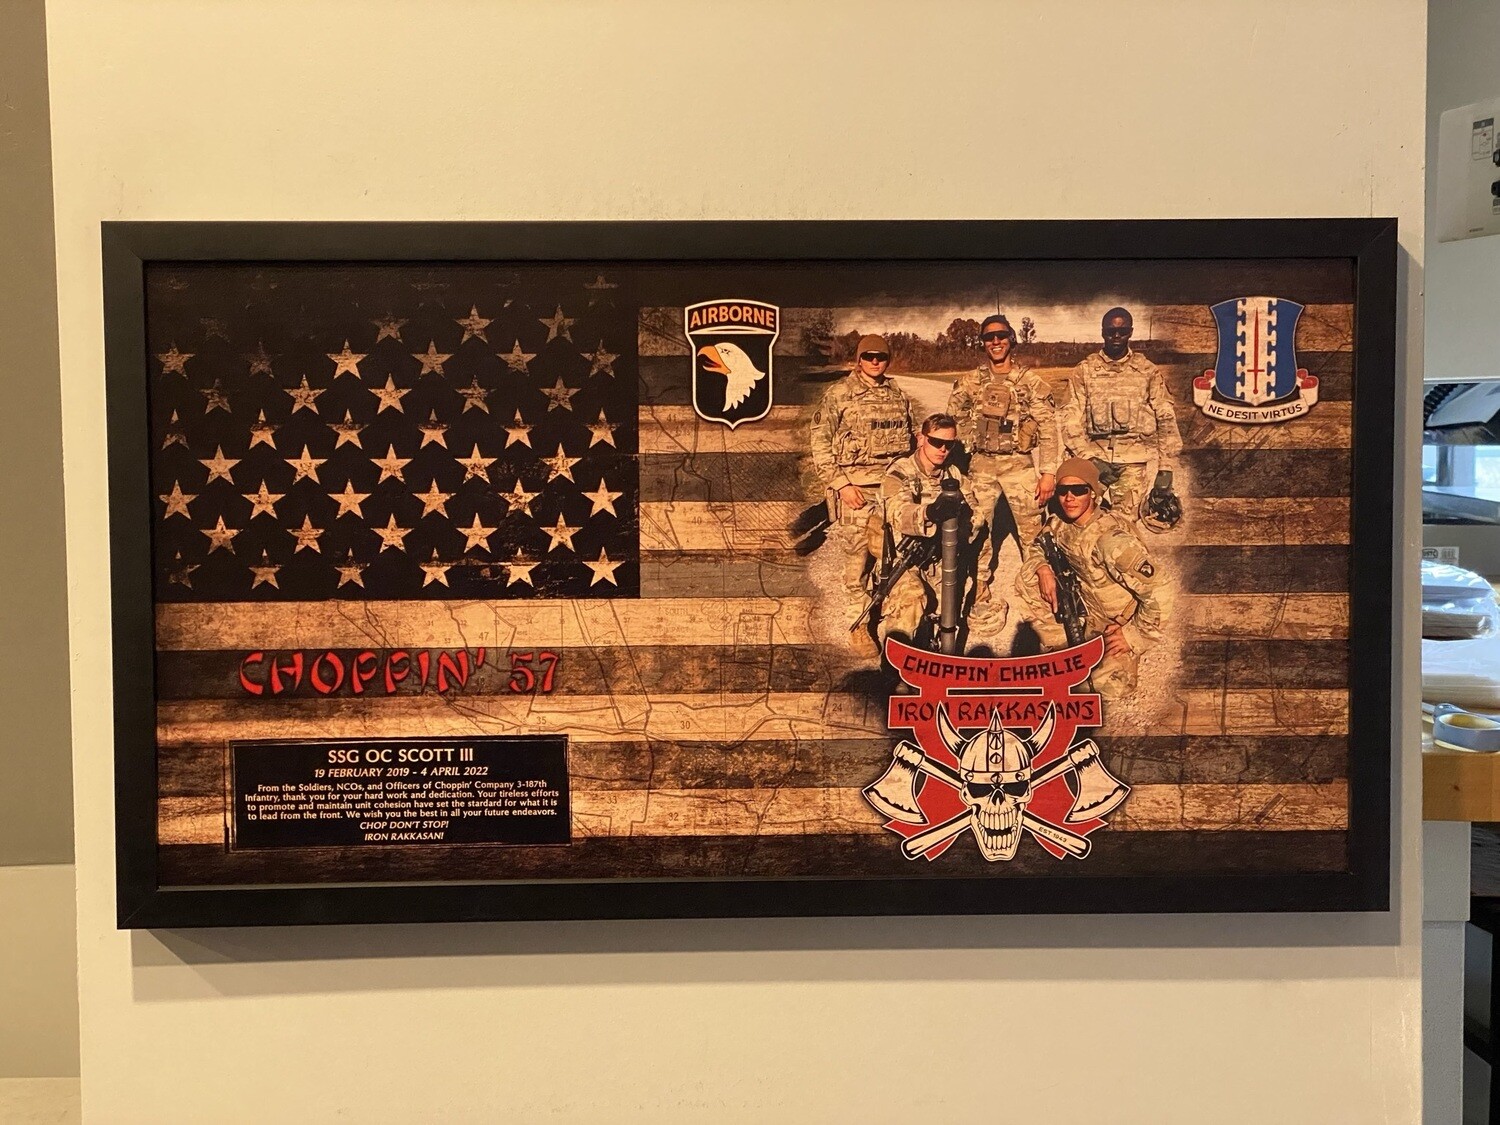 C Co "Choppin'" 3-187 IN Rustic Flag Plaque - 28.5"x15.75"